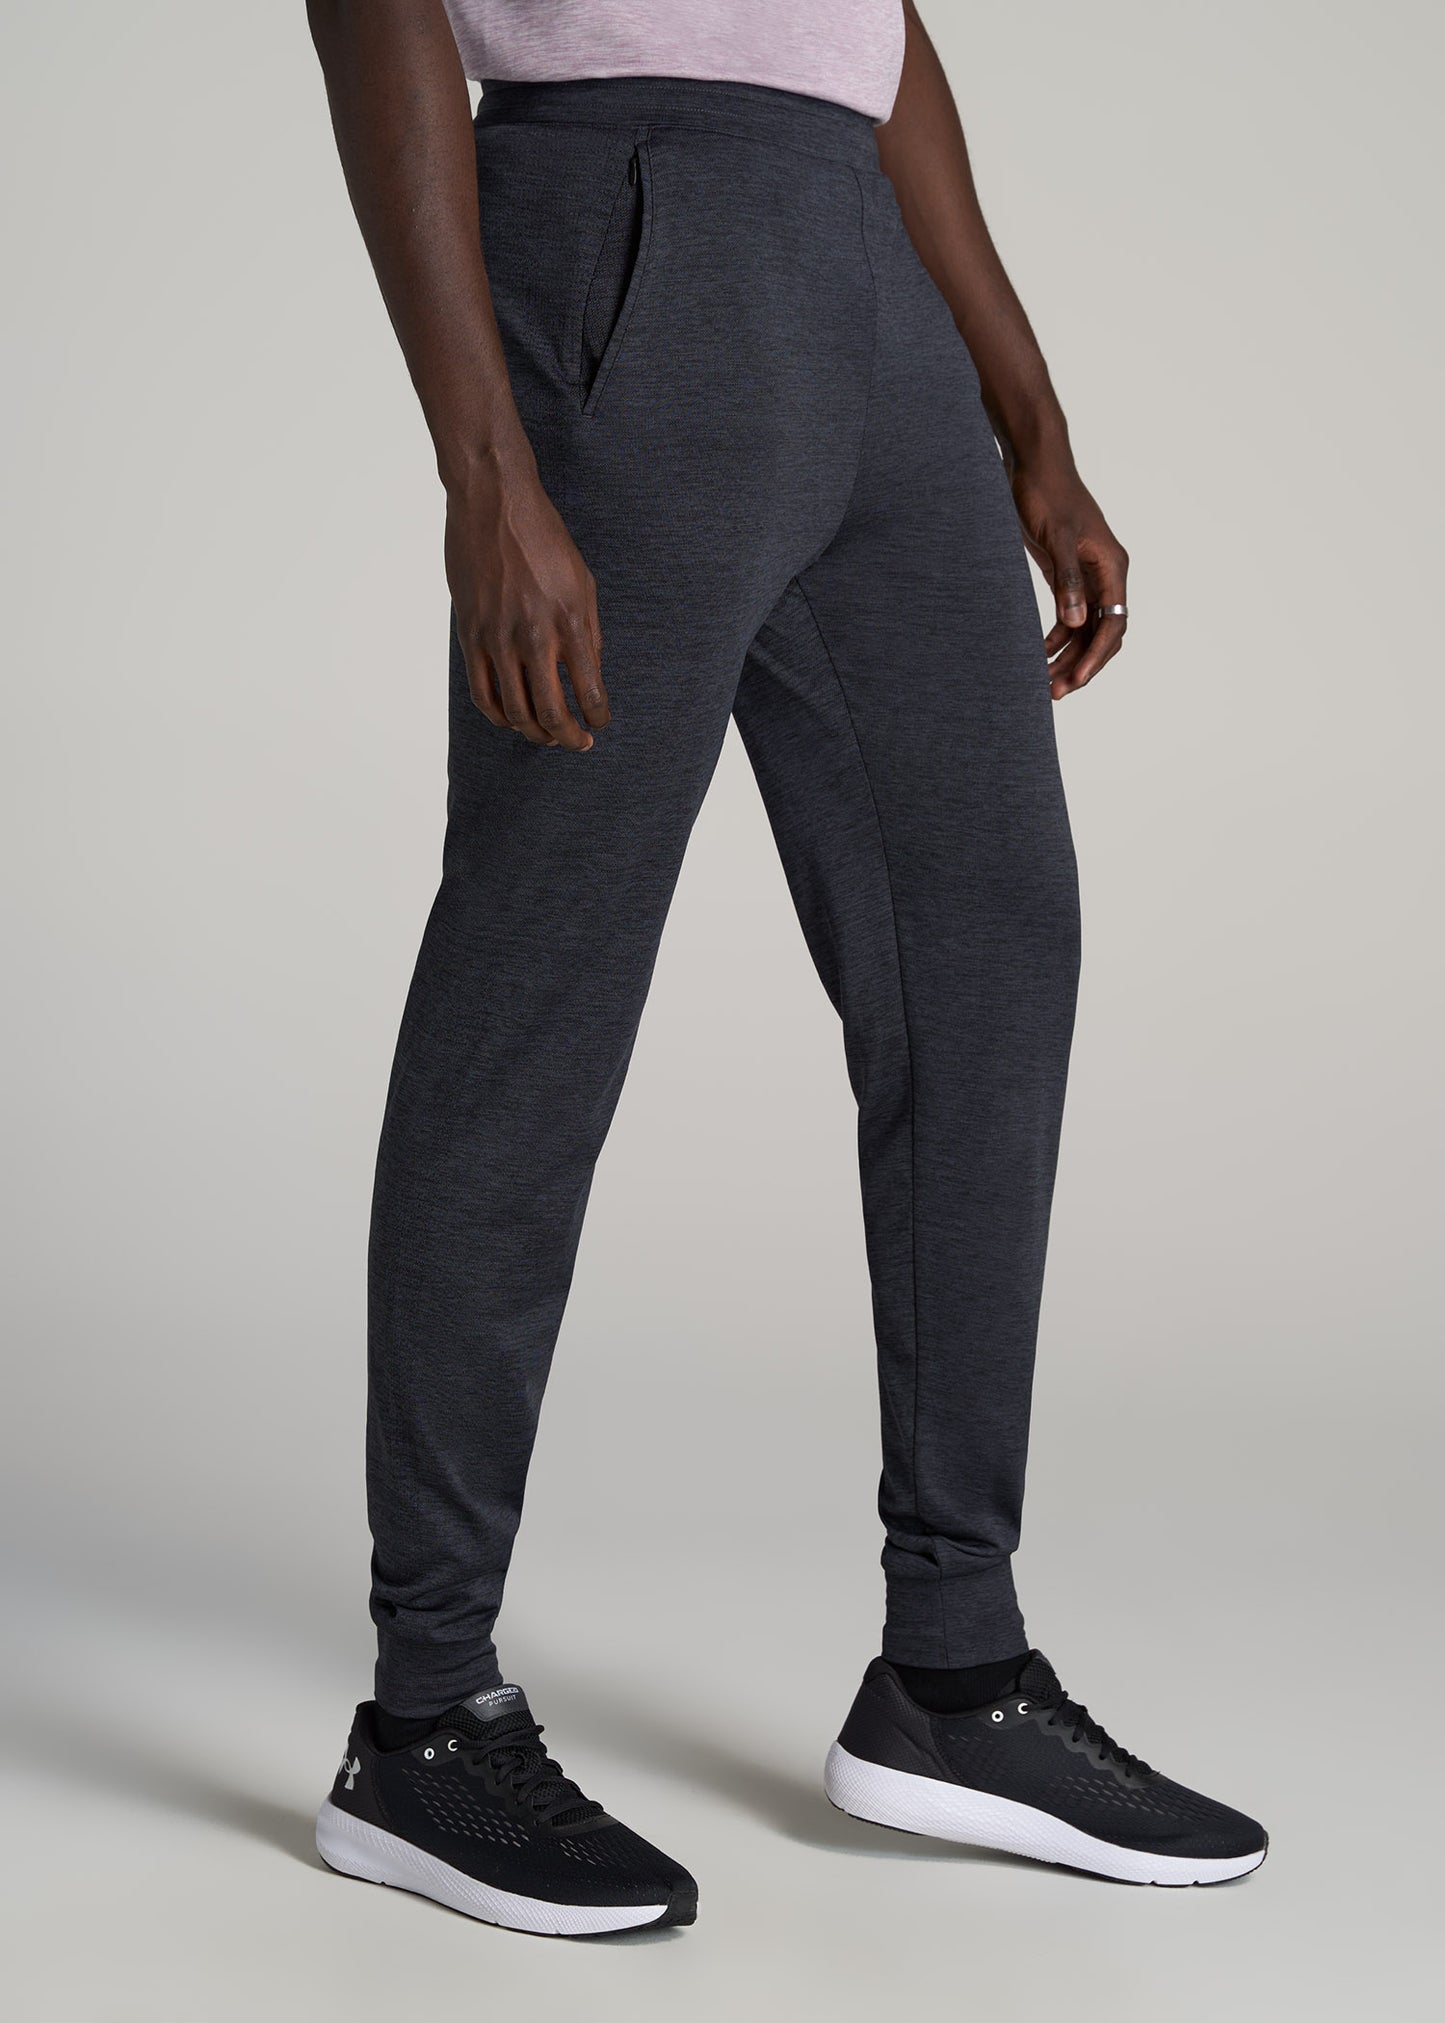 AT PERFORMANCE ENGINEERED JOGGERS FOR TALL MEN IN CHARCOAL MIX